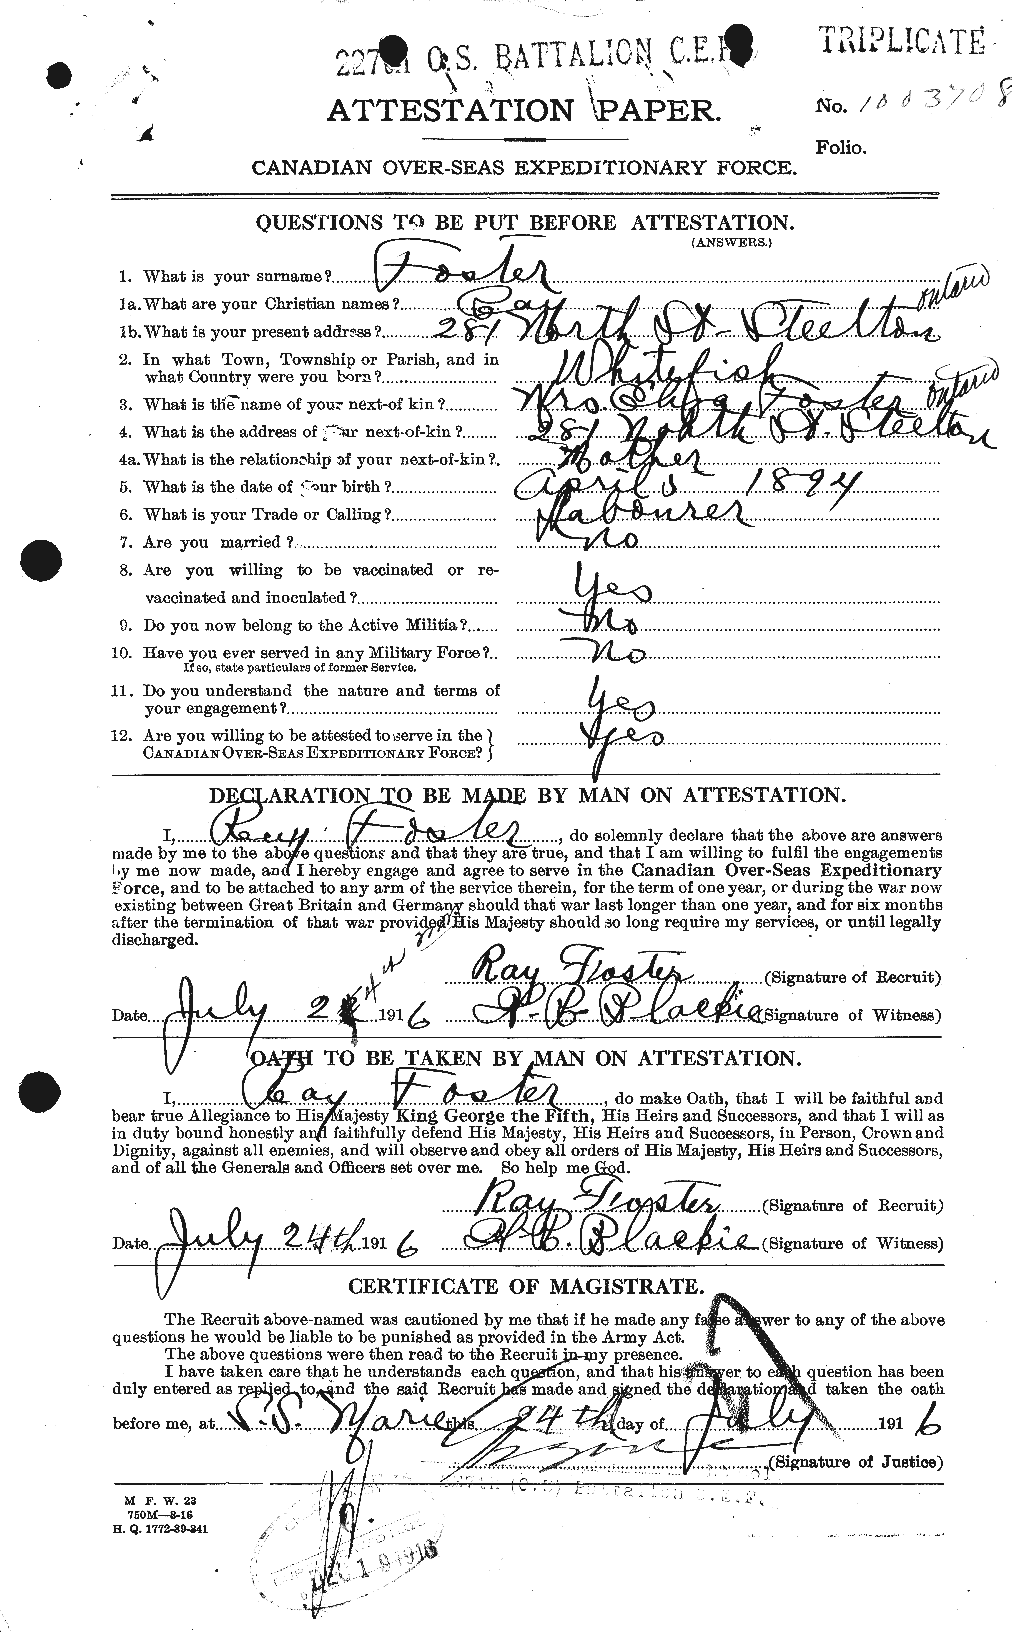 Personnel Records of the First World War - CEF 333449a